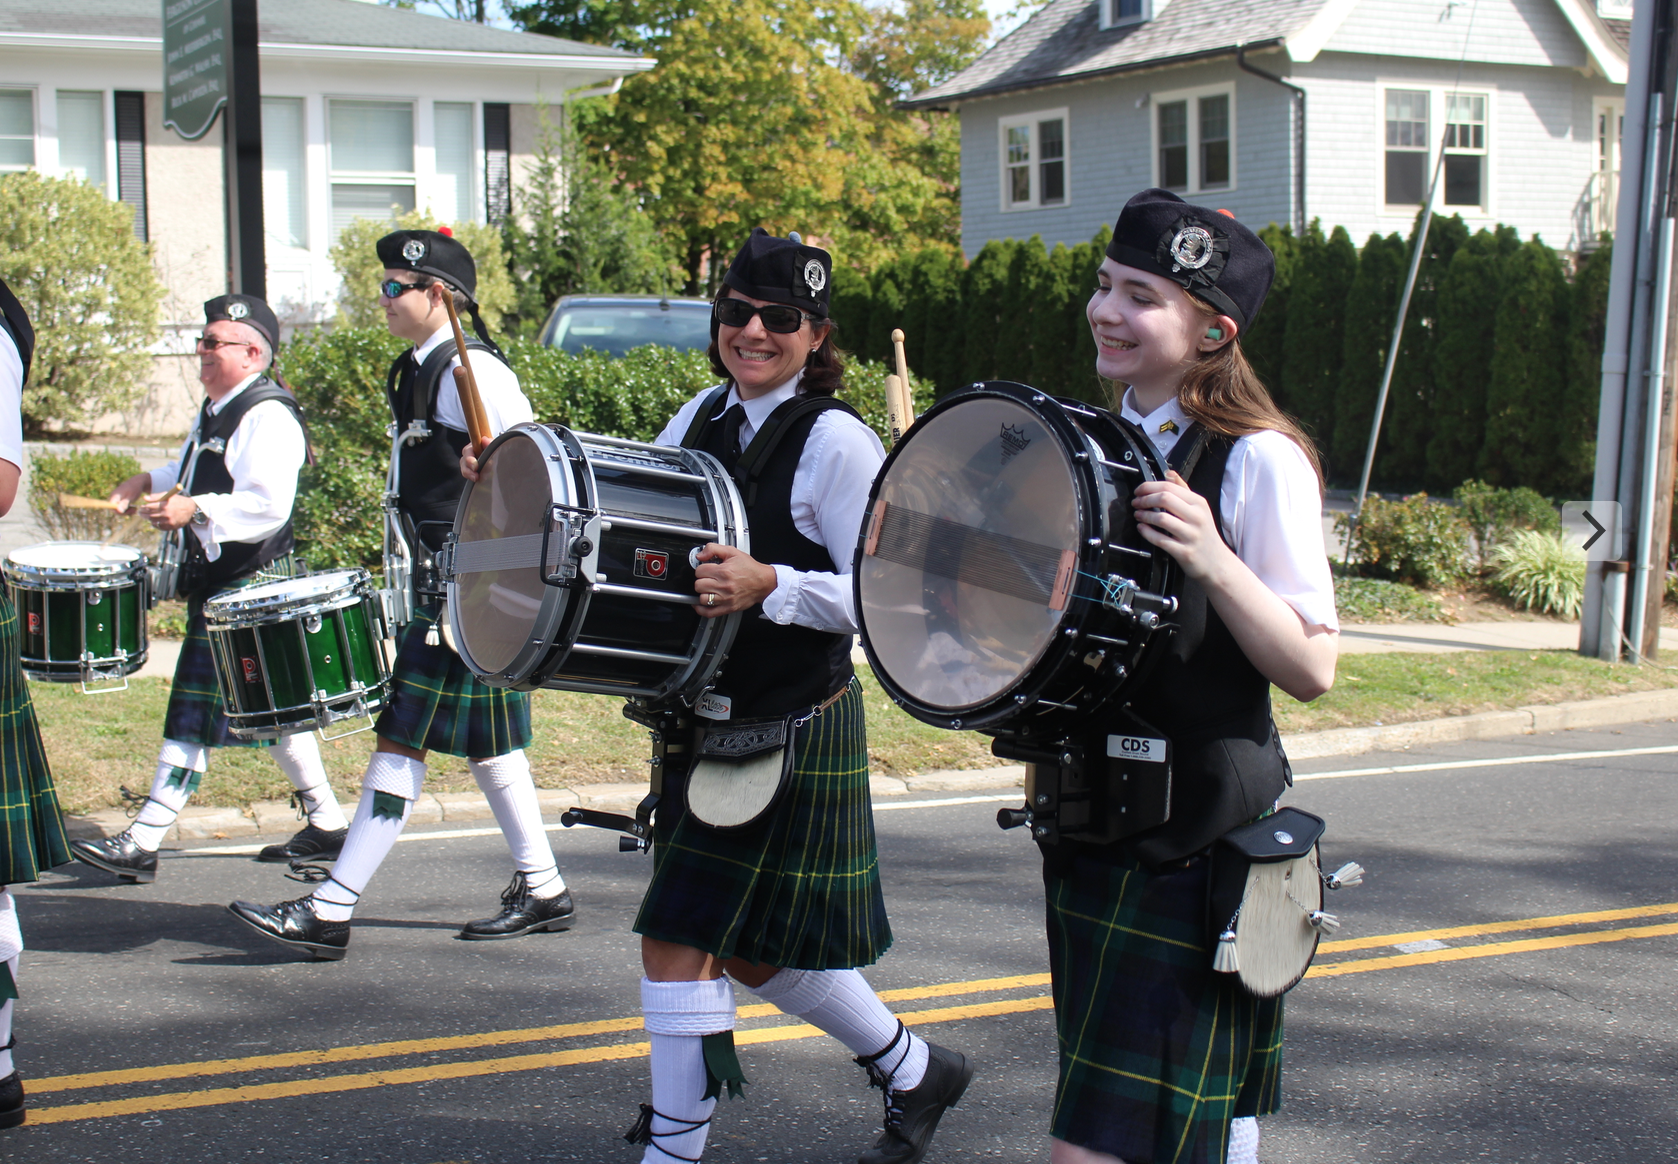 The 375th anniversary parade for the Town of Greenwich, Sept. 27, 2015. Credit: Leslie Yager